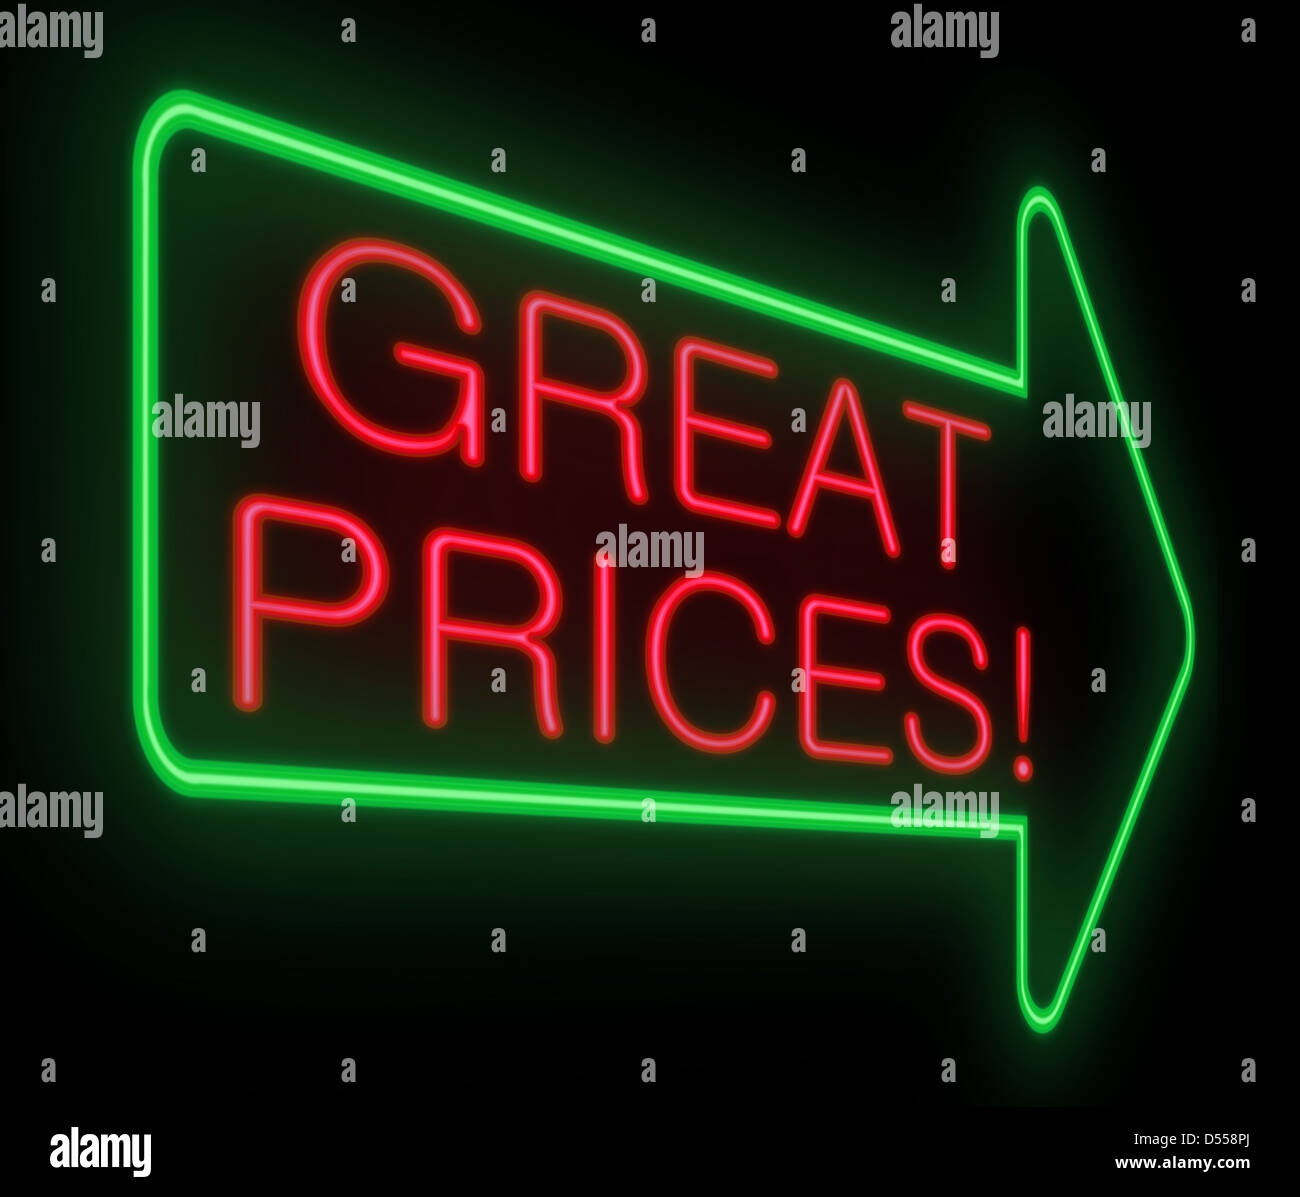 Great prices sign. Stock Photo